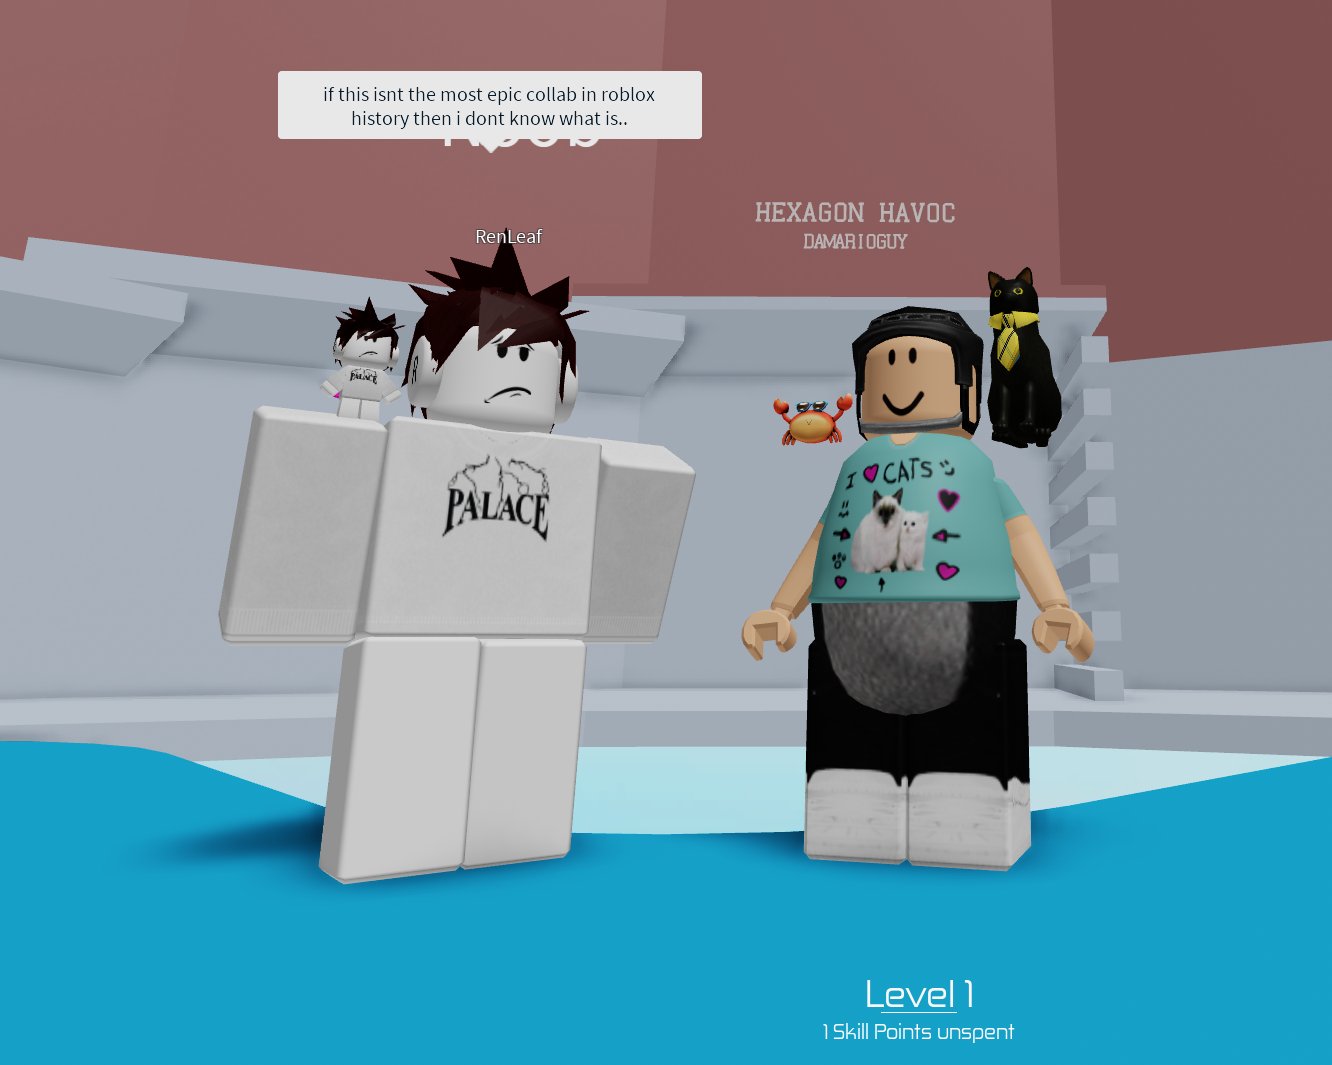 Denis On Twitter Denis Vs Realpinkleaf In The Tower Of Heck Who Is The True Obby Master Master Of Obbies Obby Legend Find Out August 16th Https T Co Ceabhjxtxy - denisdaily roblox obby